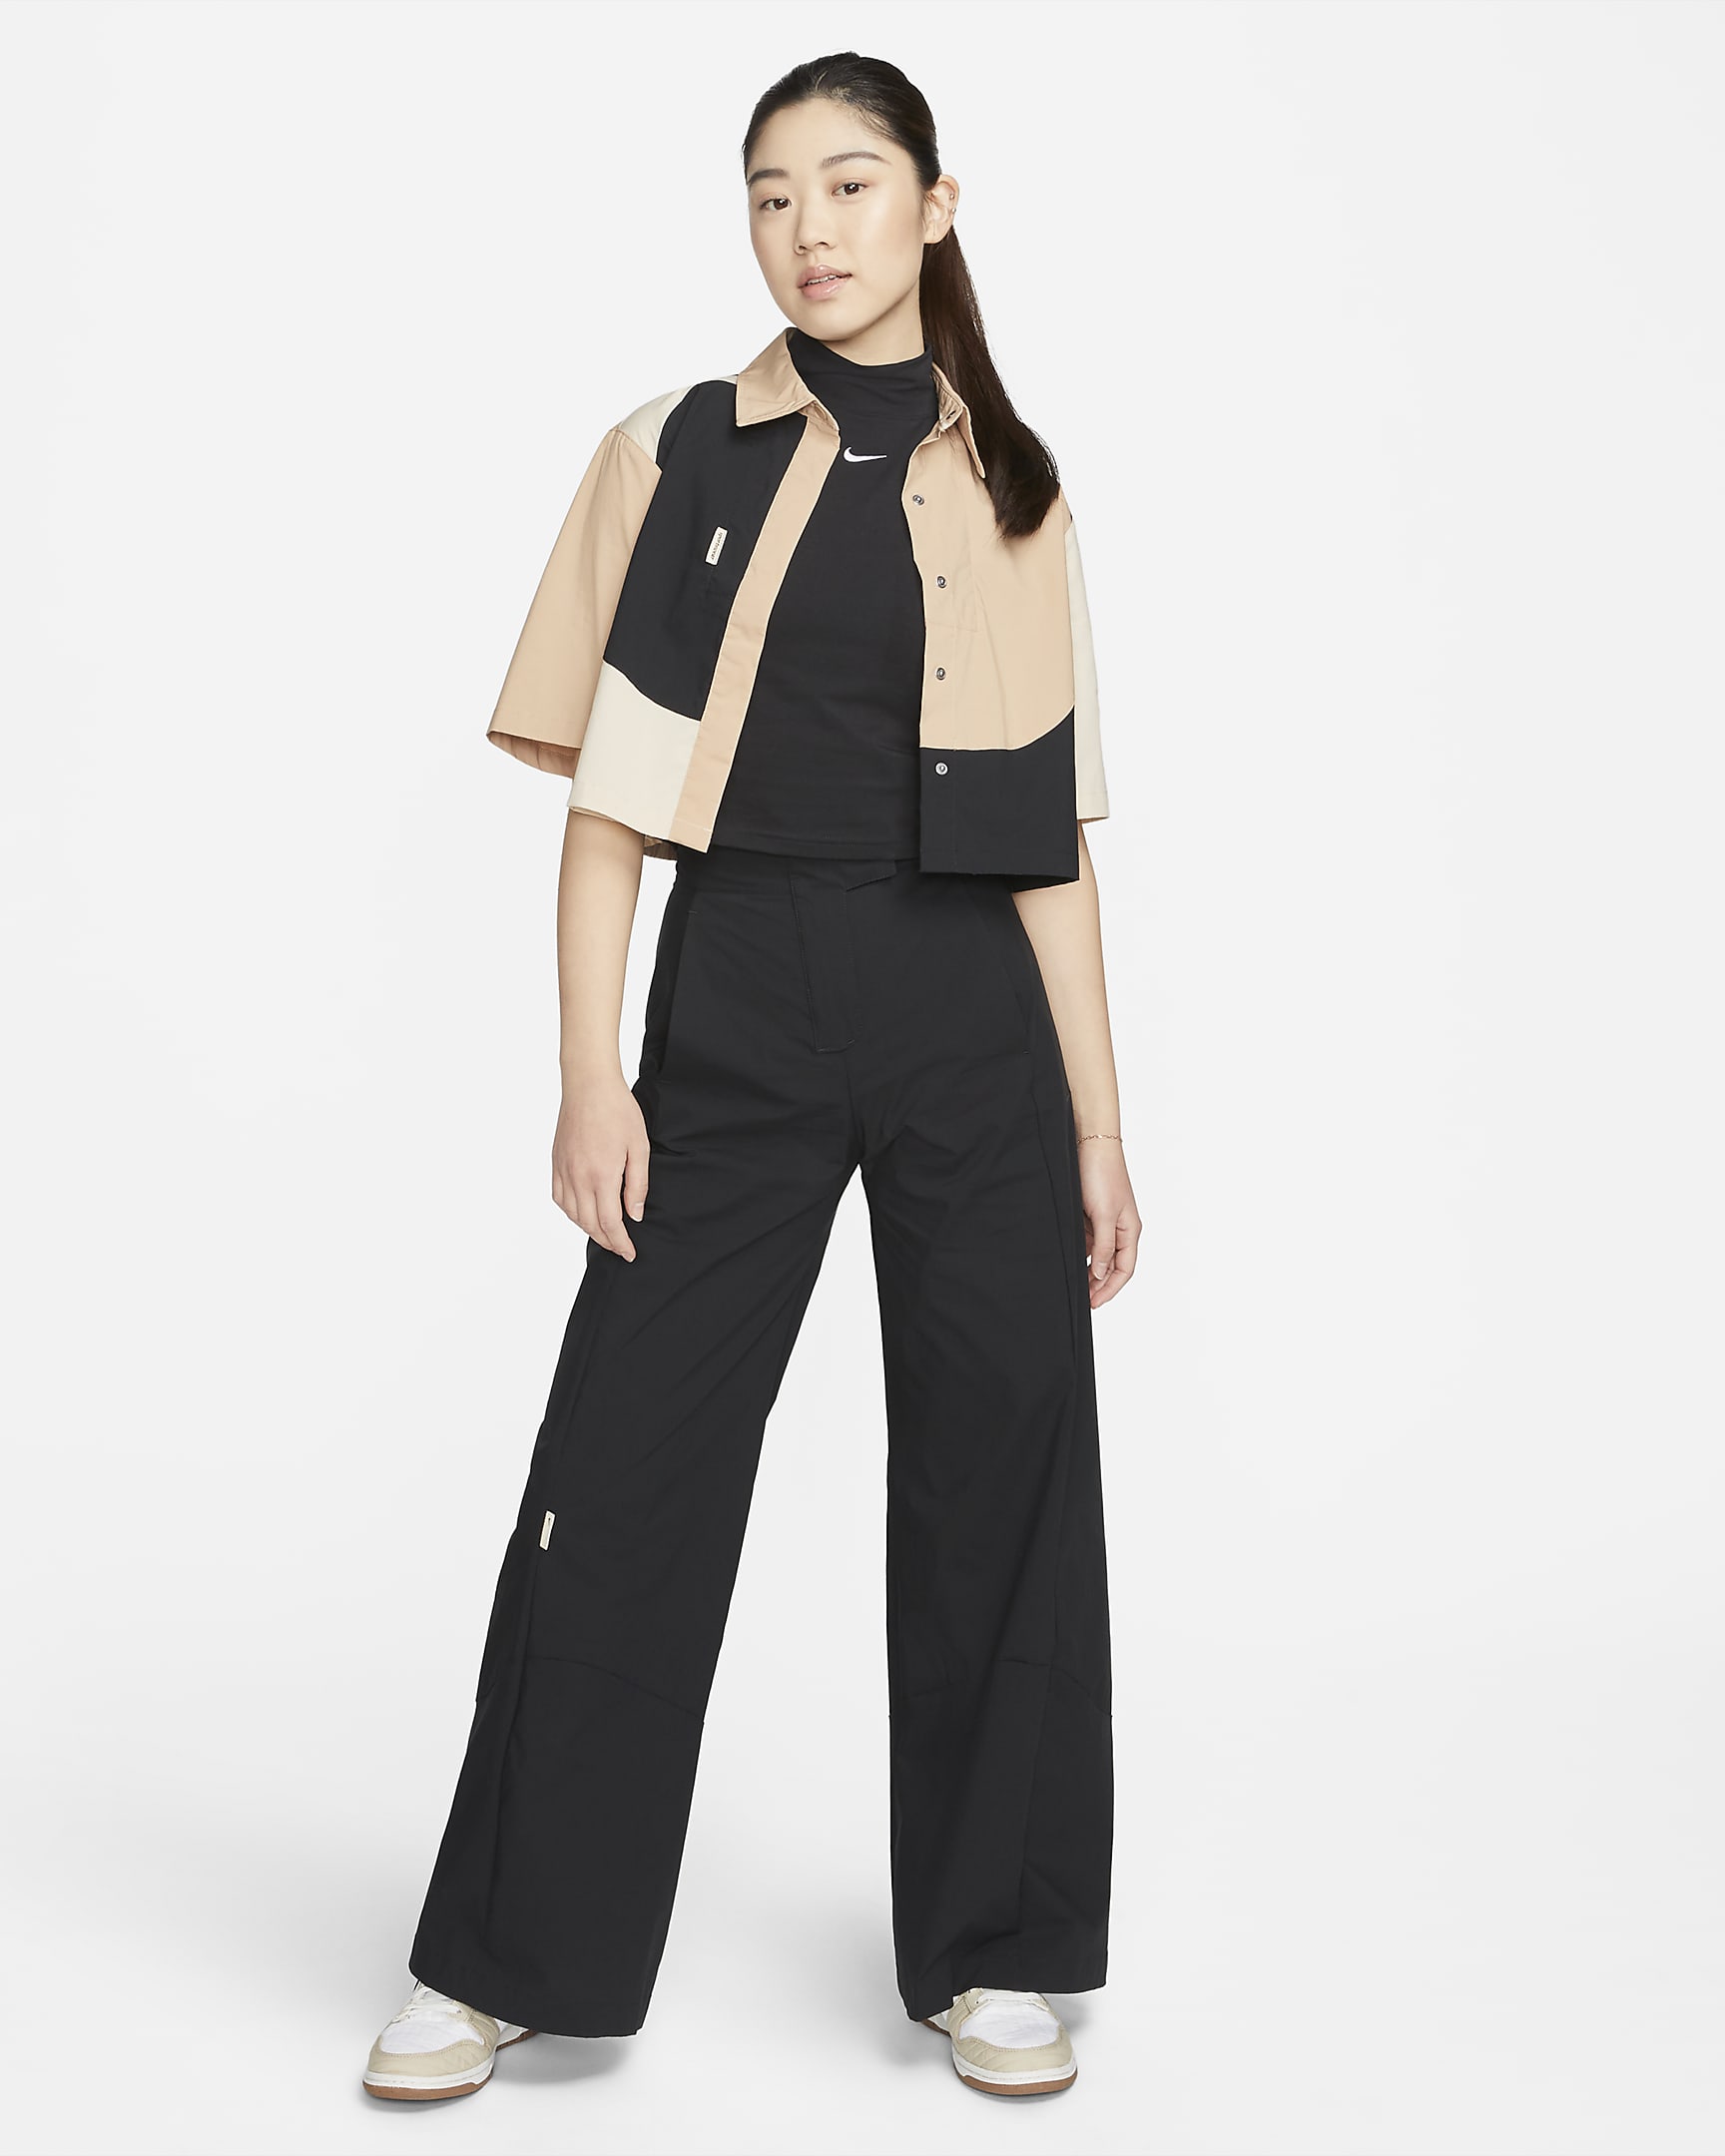 Nike Sportswear Collection Women's High-Waisted Wide-Leg Woven Trousers ...